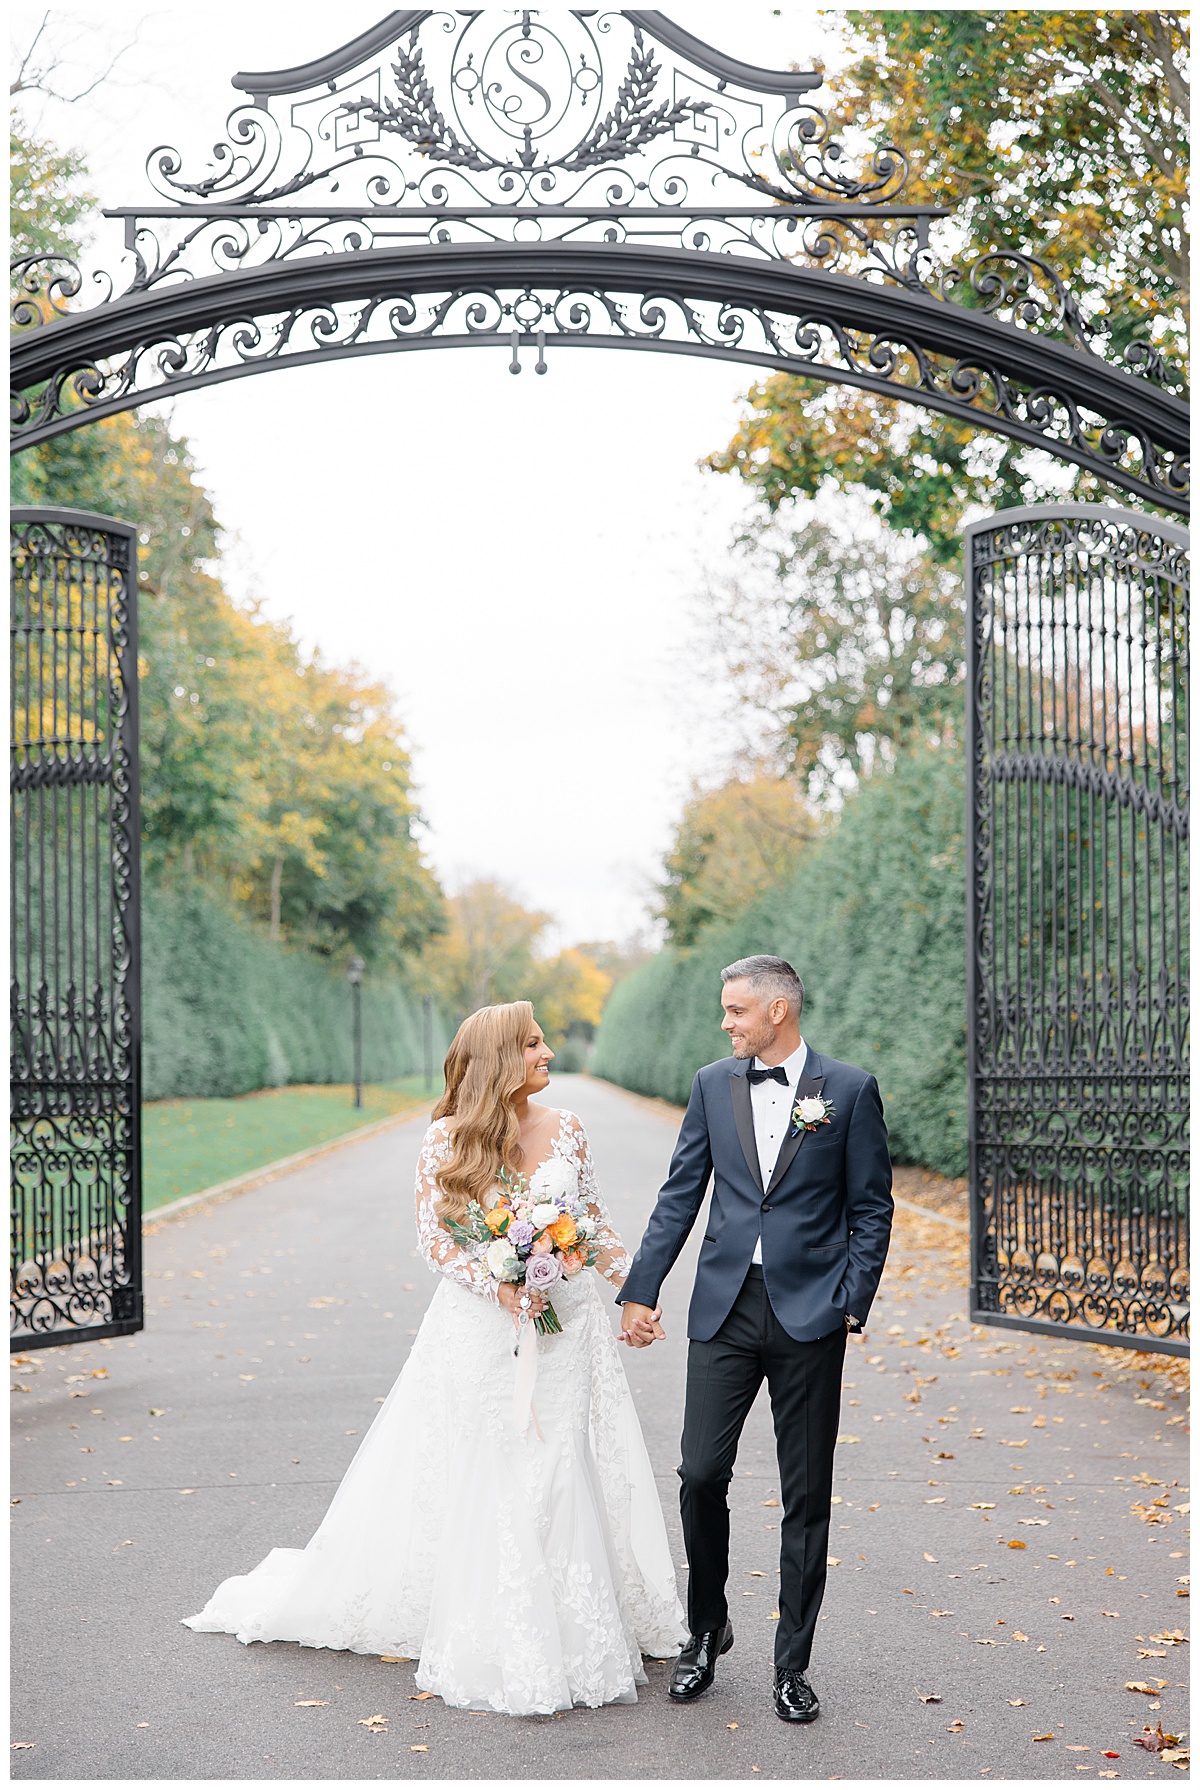 Bride and groom walking together as the gates of Shadowbrook at Shrewsbury open. 